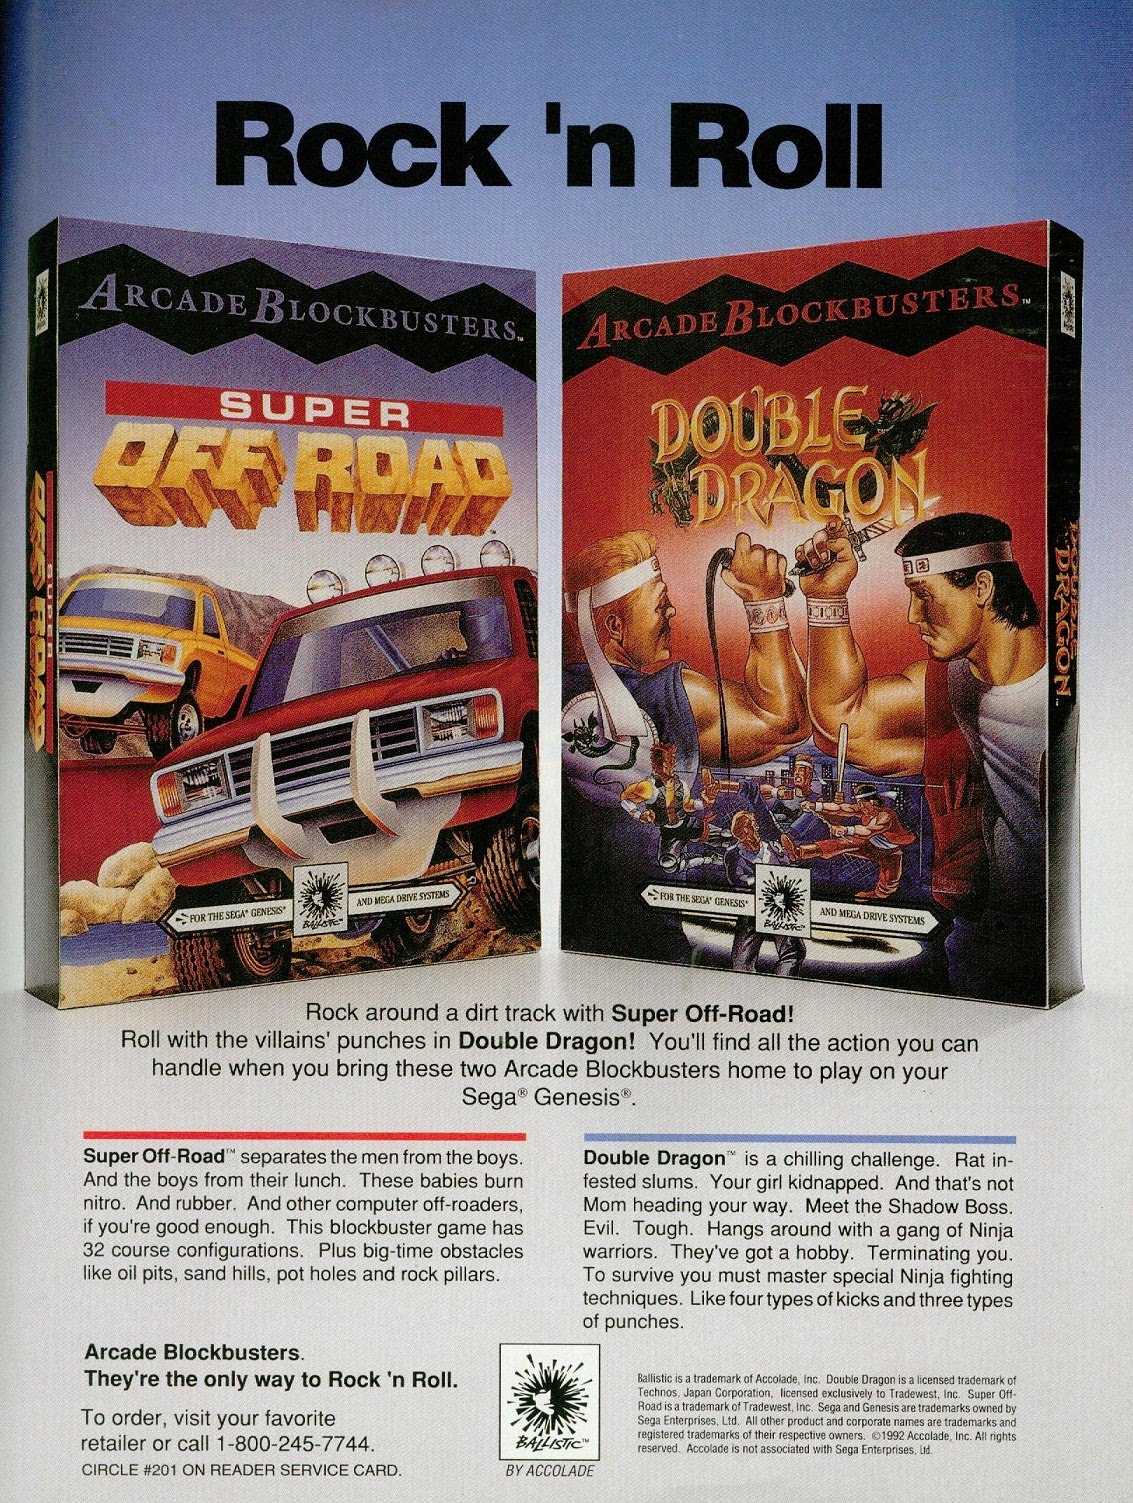 vintage gaming ads - Video game - Rock 'n Roll ArCADE Blockbuste Arcade Blockbusters | Arcade Blockbusters. Lascade Blockbusters Super Double Rock around a dirt track with Super OnRoad! Roll with the villains punches in Double Dragon! You'll find all the 